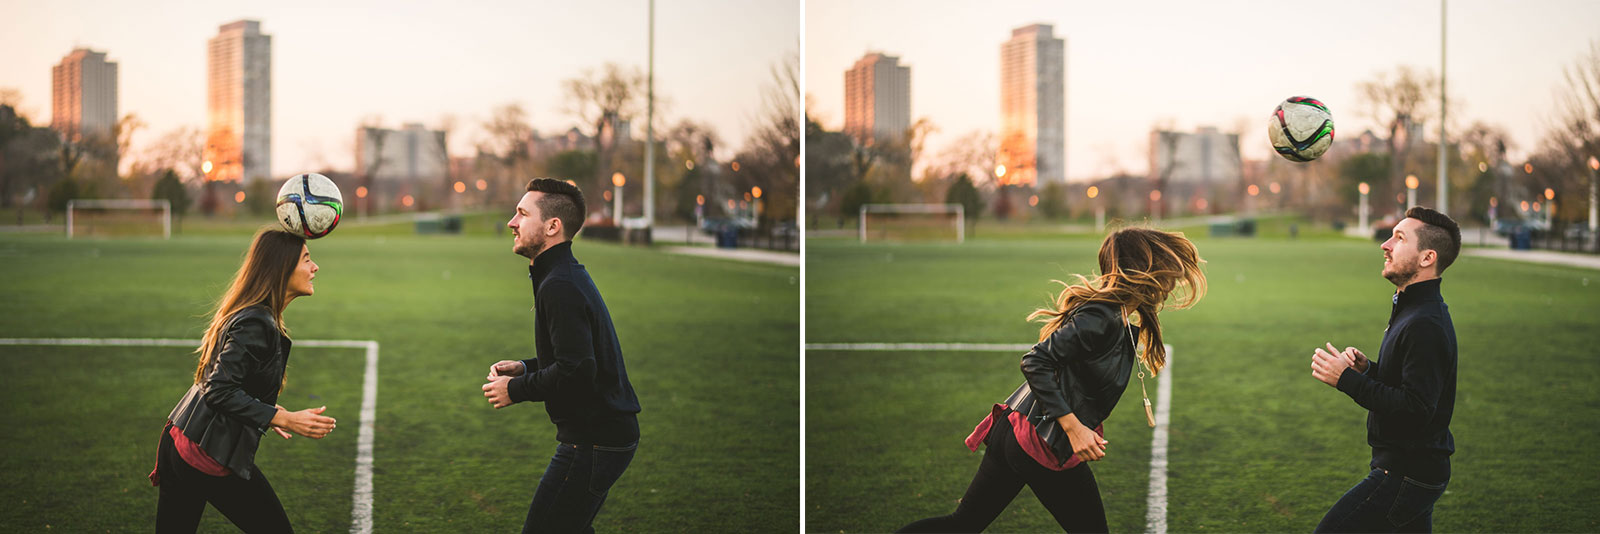 09 playing soccer - Joanna + Jamie // Engagement session in West Lakeview and Lincoln Park